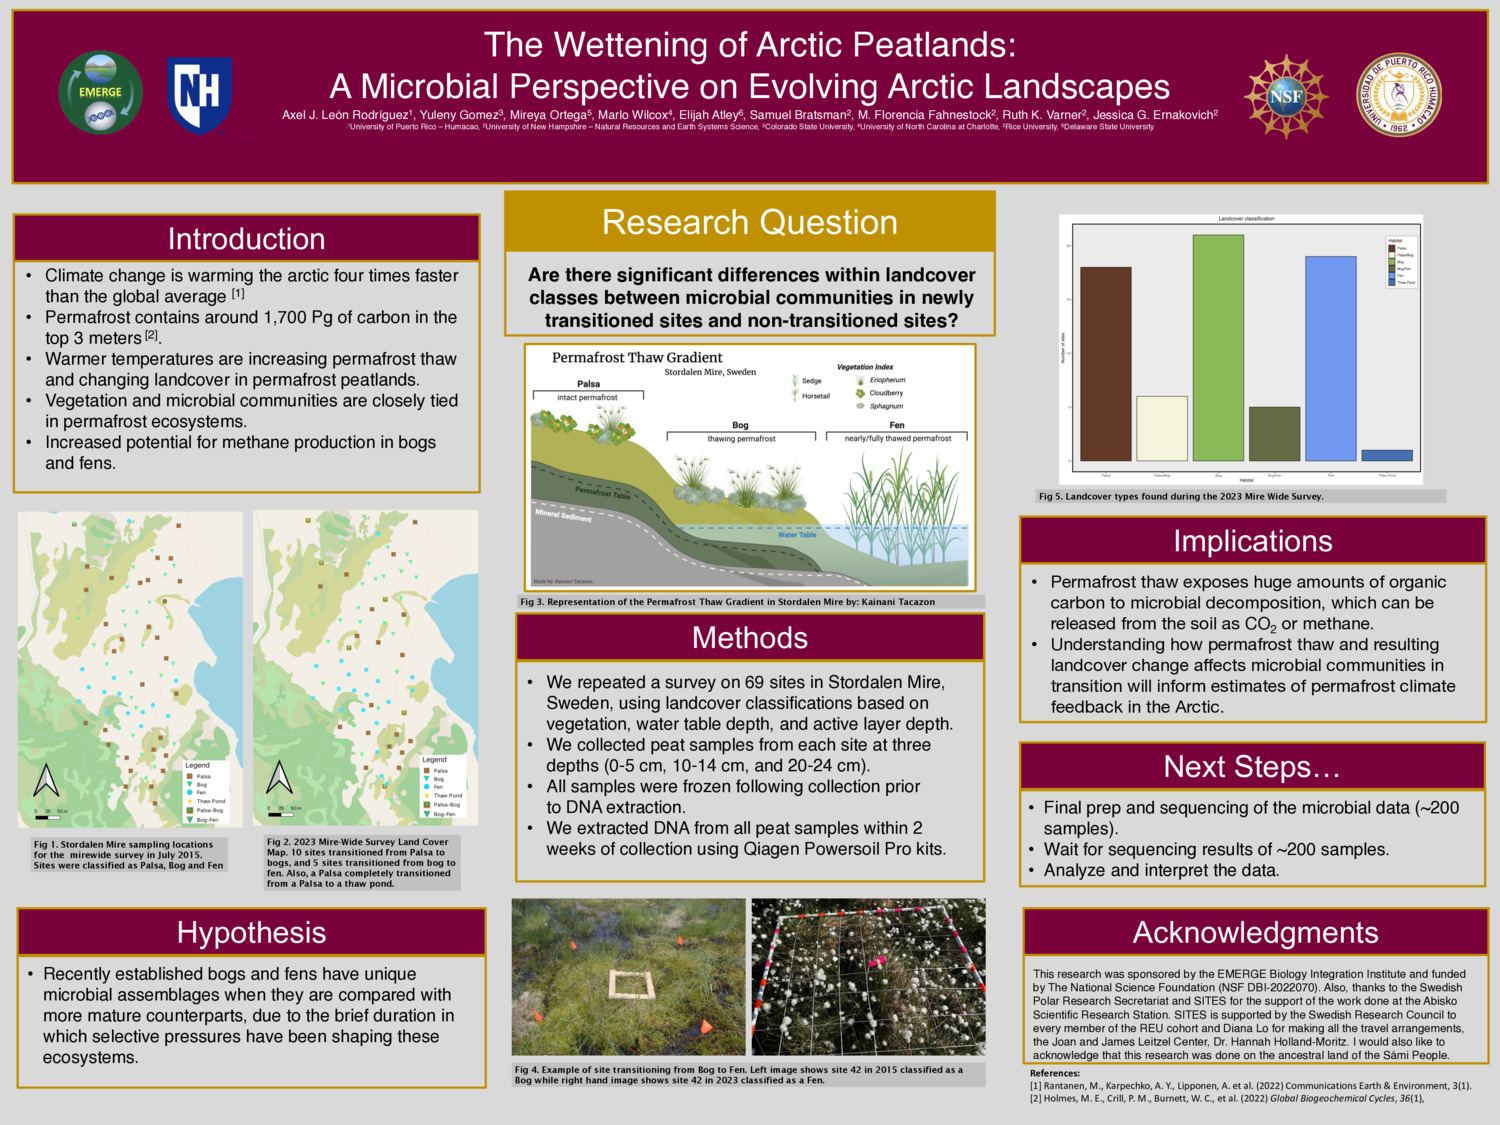 The Wettening Of Arctic Peatlands:  A Microbial Perspective On Evolving Arctic Landscapes by mfmprado